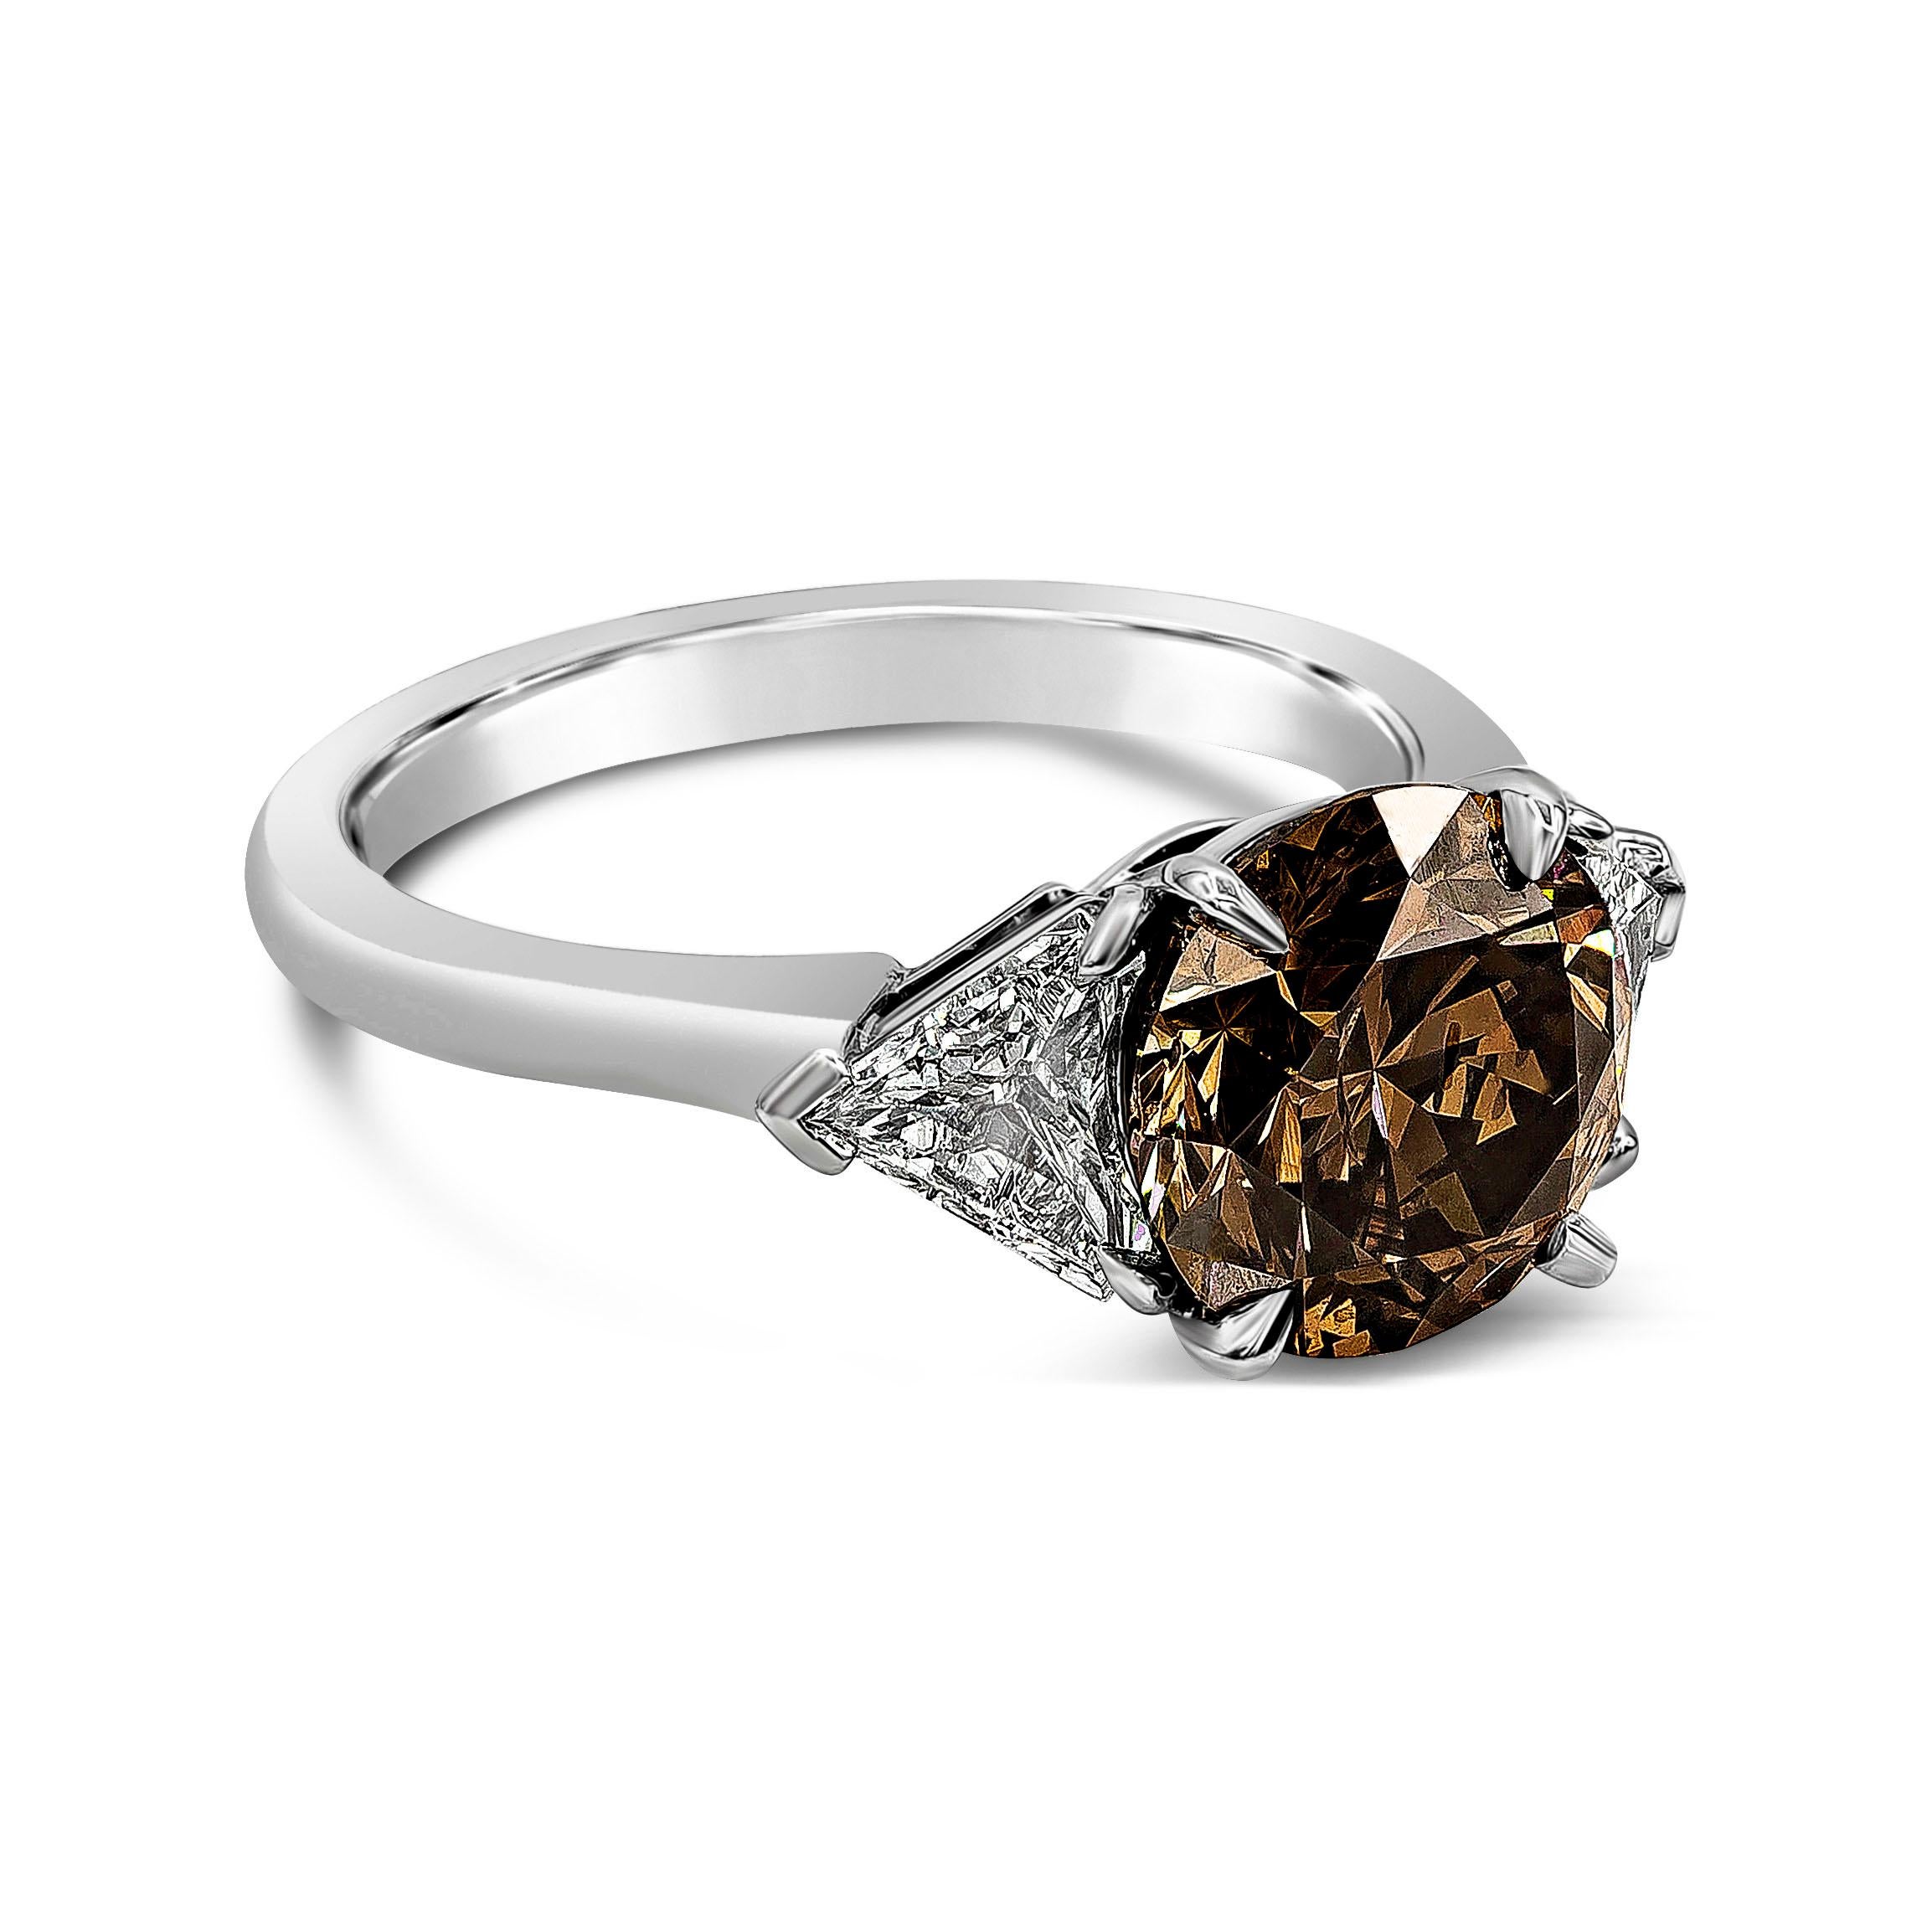 A unique diamond stone engagement ring, showcasing a 3.04 carats round brilliant cut diamond certified by GIA as Fancy Dark Orangey Brown color and SI2 clarity, set on a four claw prong basket. Flanked by two gorgeous trillion cut diamonds weighing